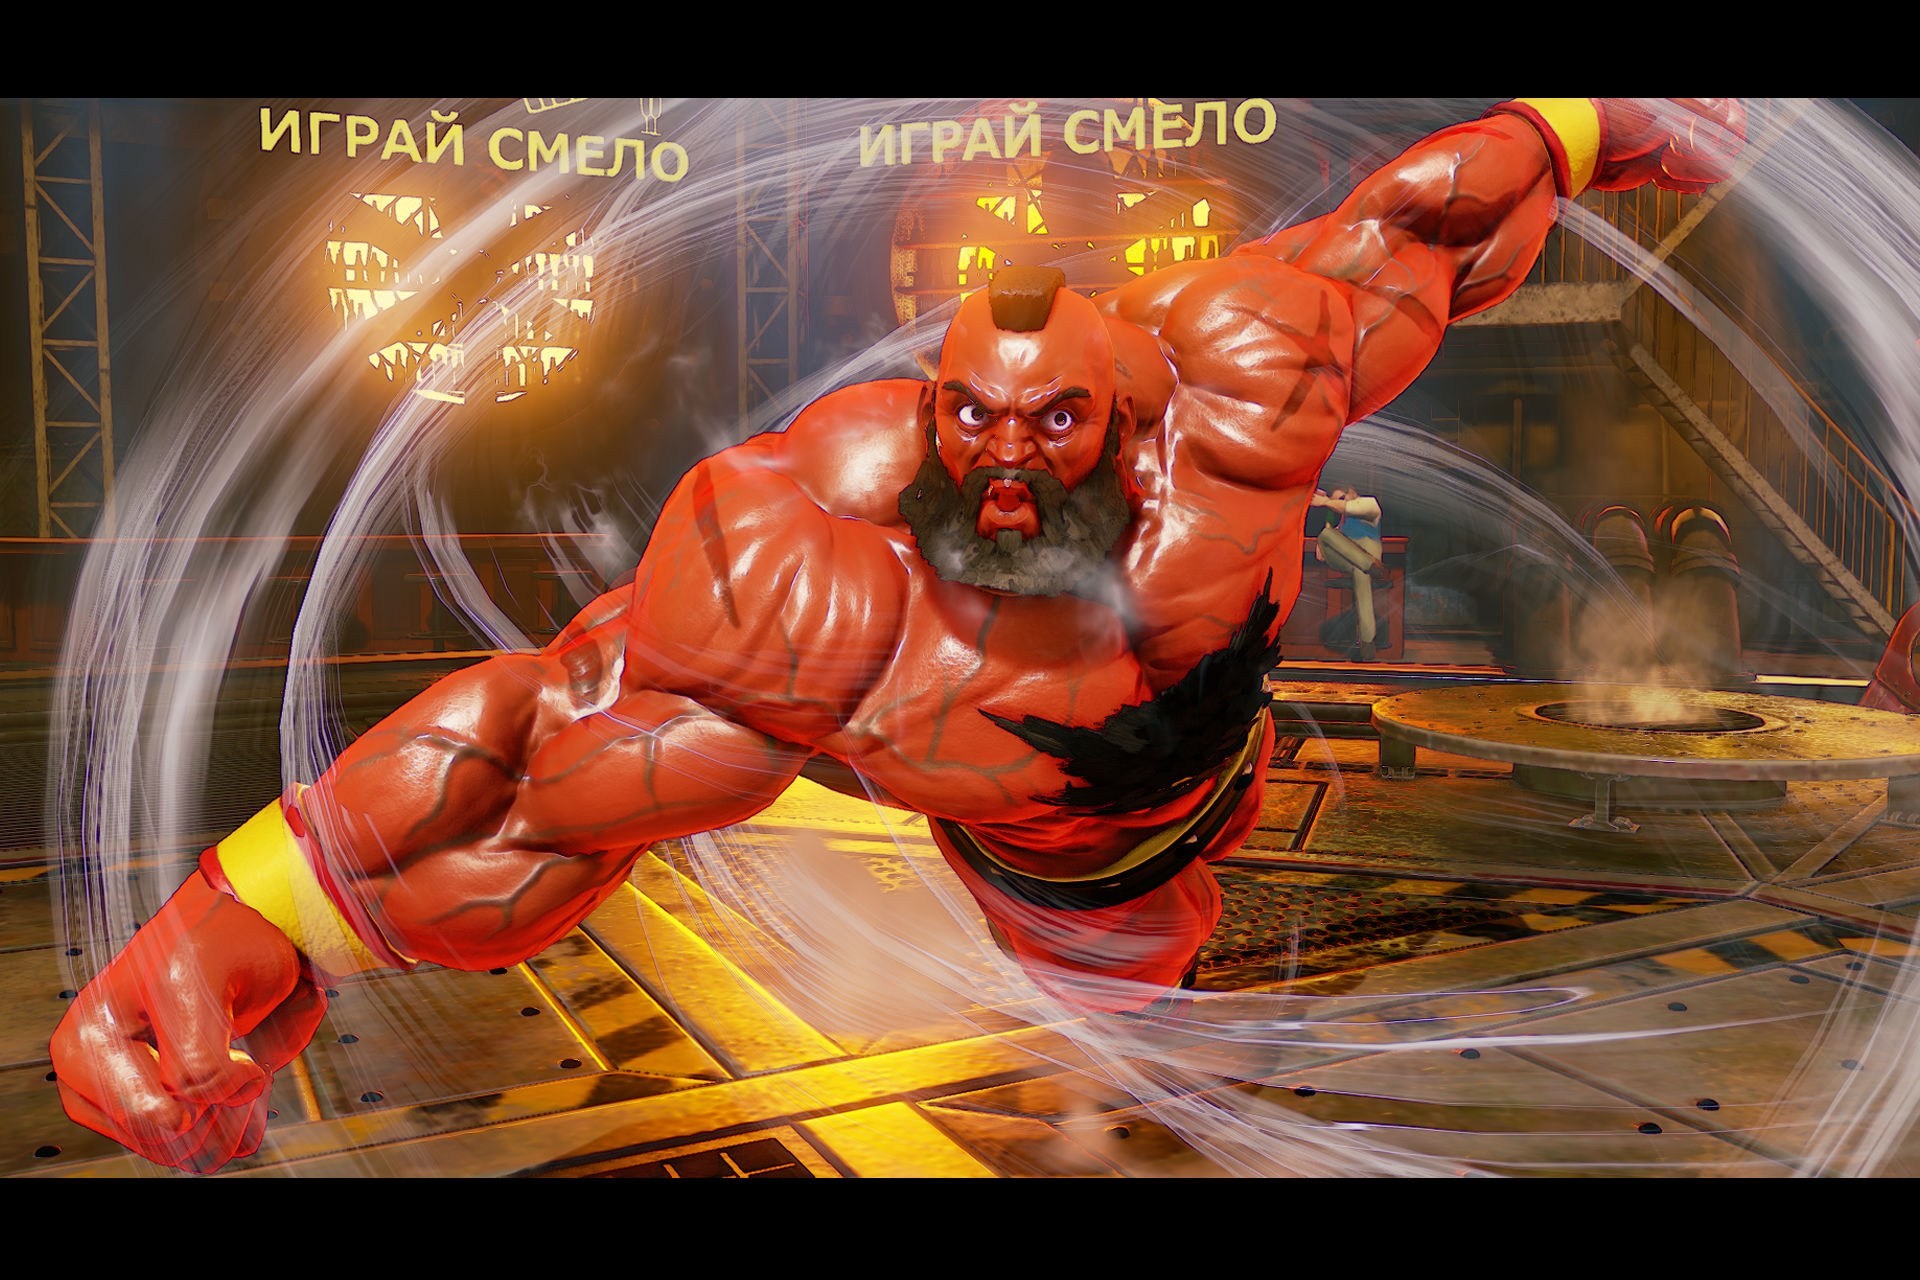 Street Writer: The Word Warrior: The Red Tornado returns in Street Fighter  6, a look at Zangief.